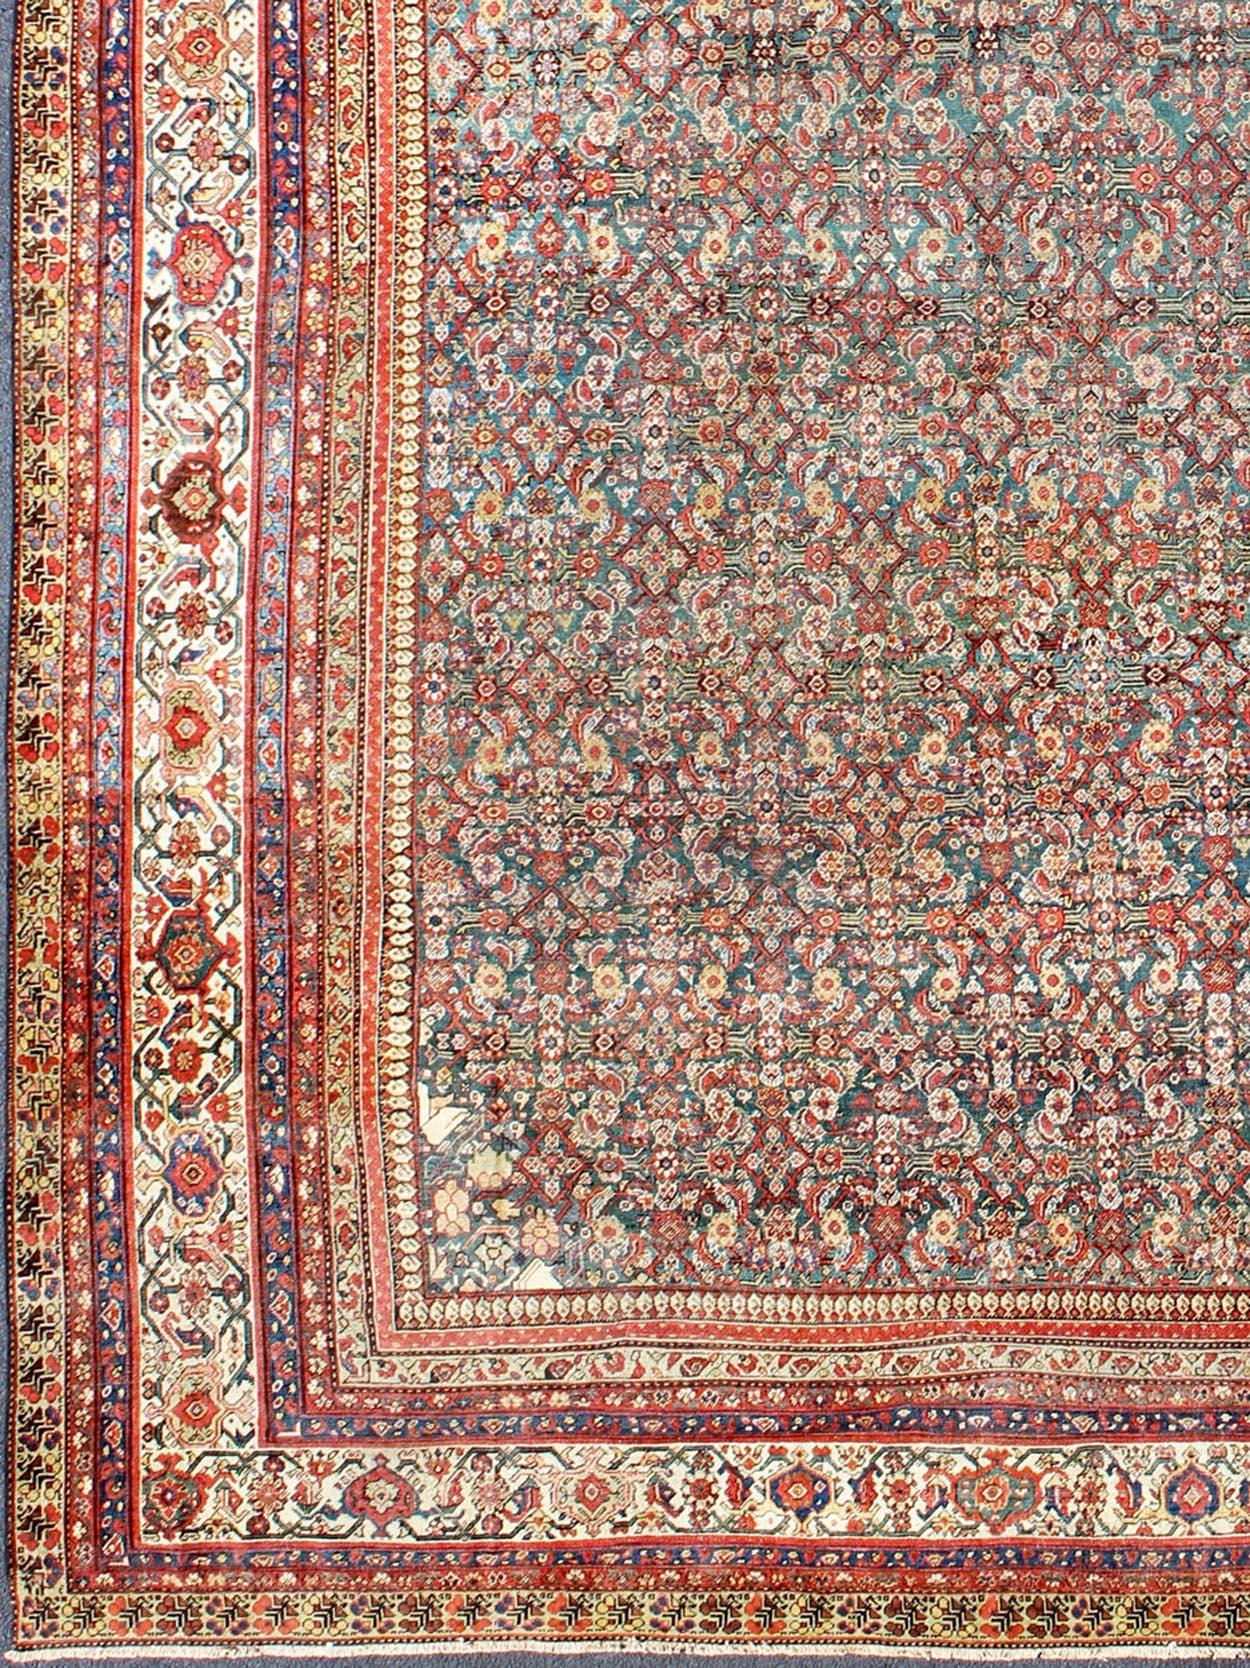 Large all-over antique Persian Sultanabad rug in green background.
Colorful all-over floral design antique Persian Sultanabad rug, rug ema-7512, country of origin / type: Iran / Sultanabad, circa 1900

This antique Persian Mahal relies heavily on